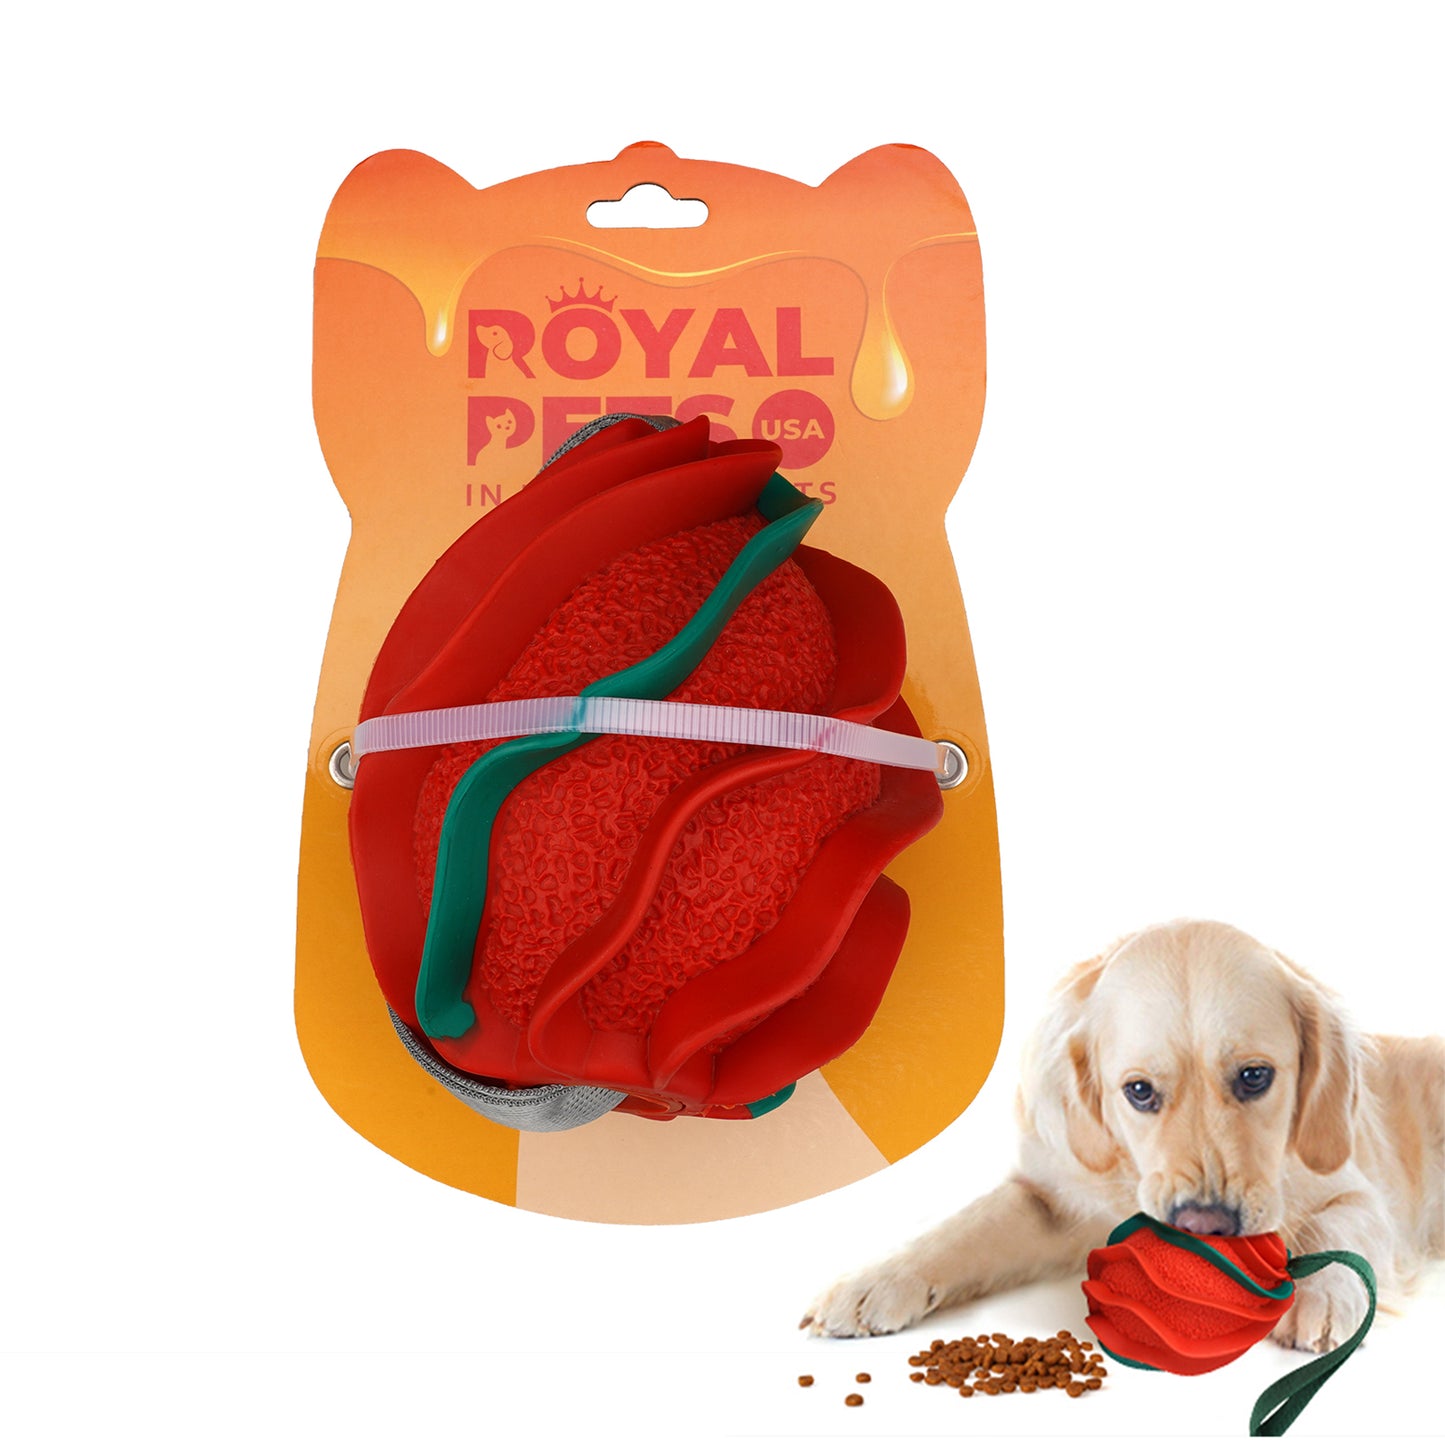 ROYAL PETS USA Indestructible, Durable & Tough Spring Dog Chew Toy for Aggressive Chewers. Slow Treat Dispensing Interactive Toys for S, M & L Breed -100% NATURAL RUBBER -10000 BITES TESTED - UNIQUE DESIGN FOR ORAL CARE